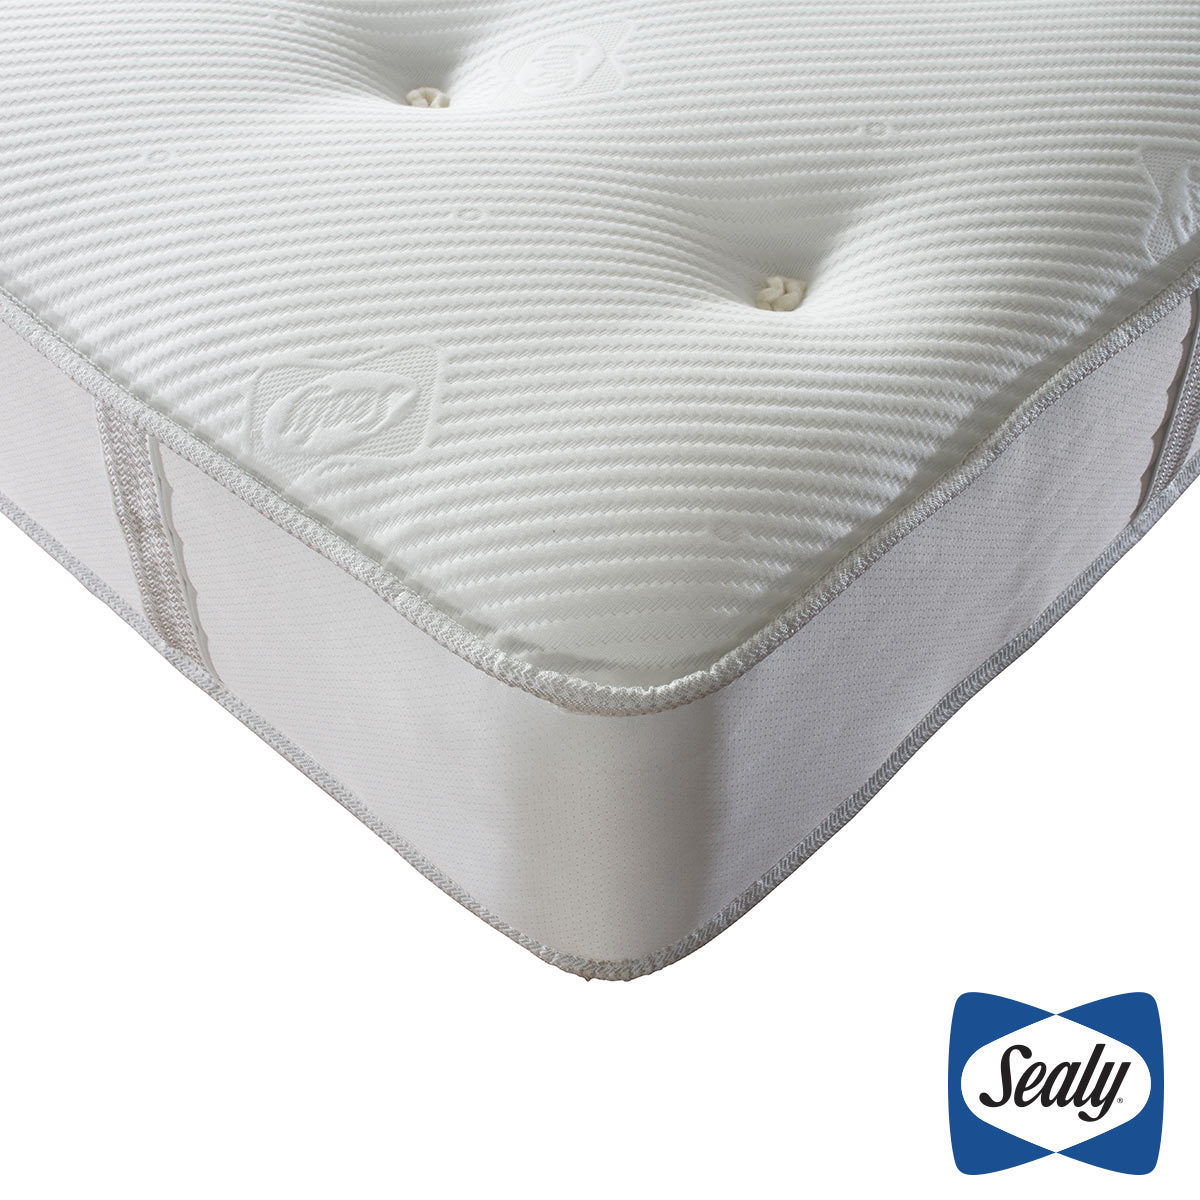 Sealy 1000 Deluxe Pocket Memory Tufted Mattress in 4 Sizes